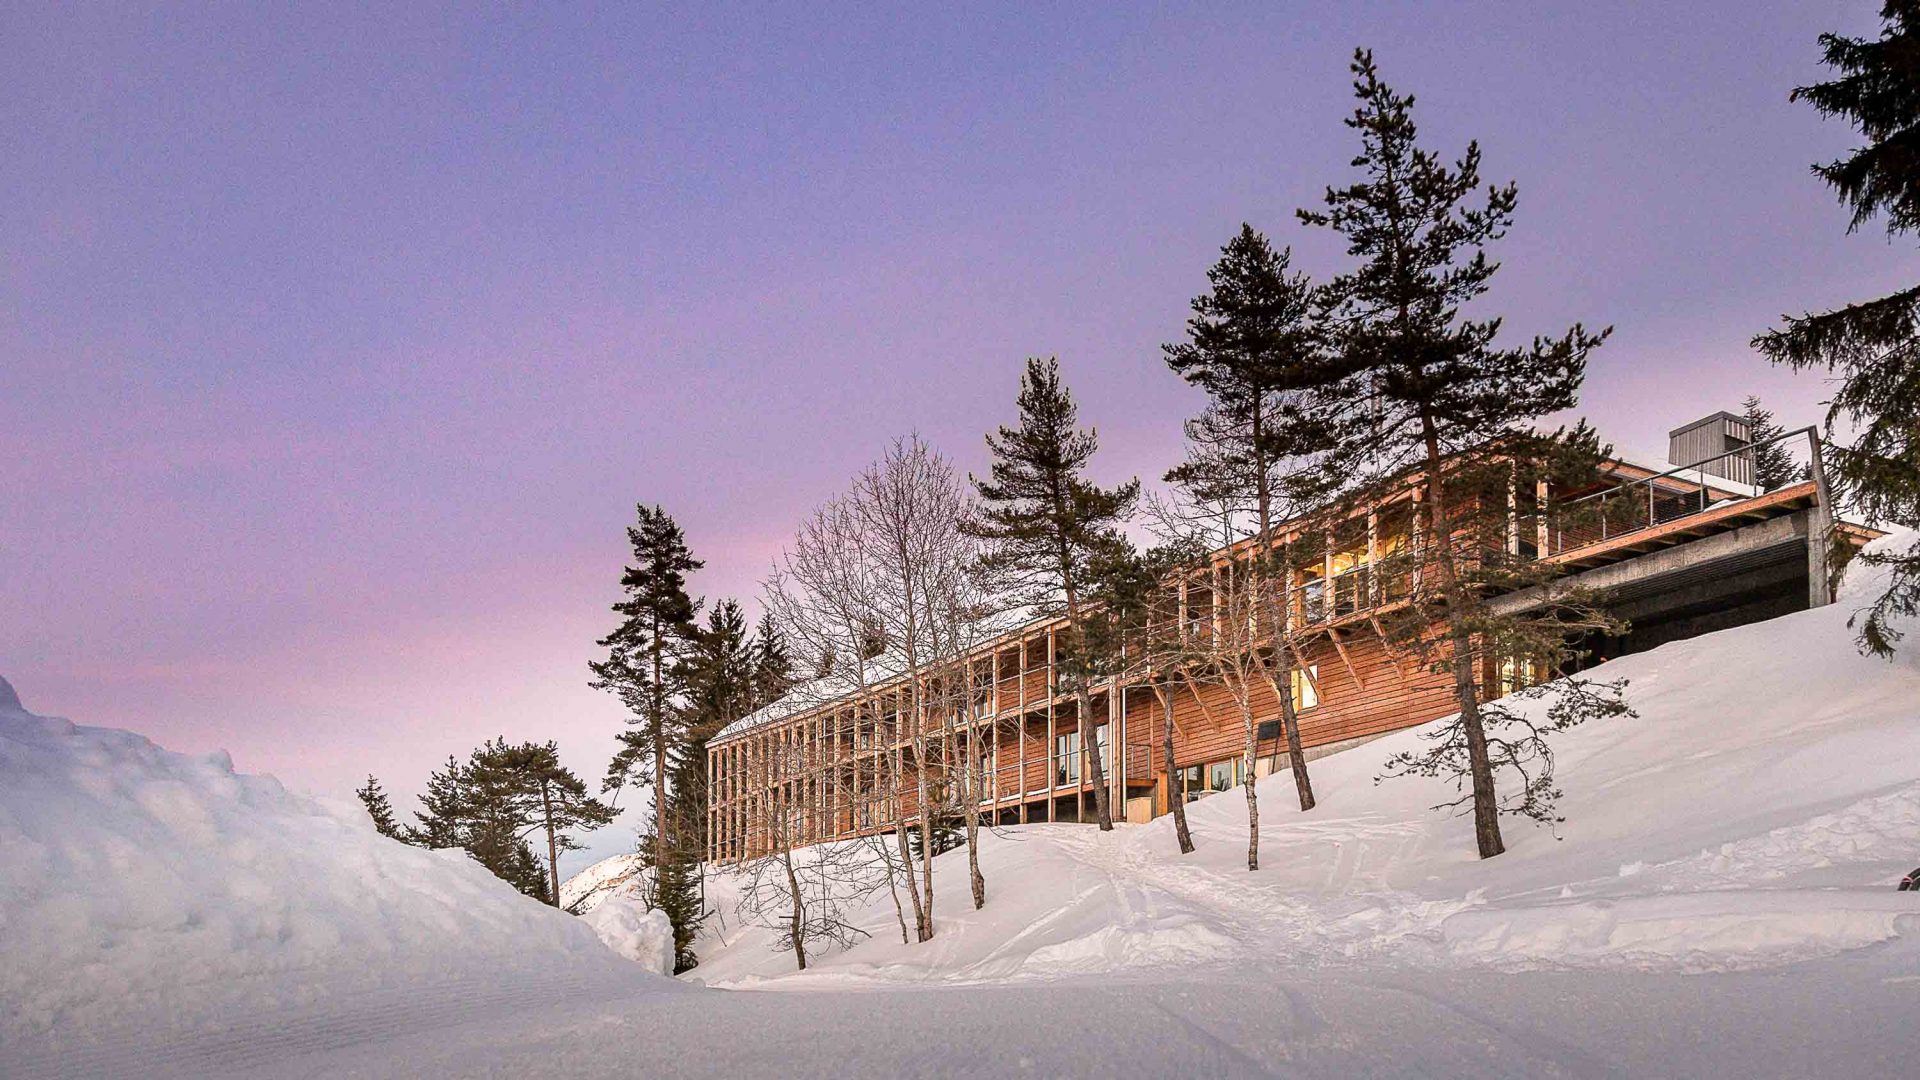 A hotel surrounded by snow and pine trees.